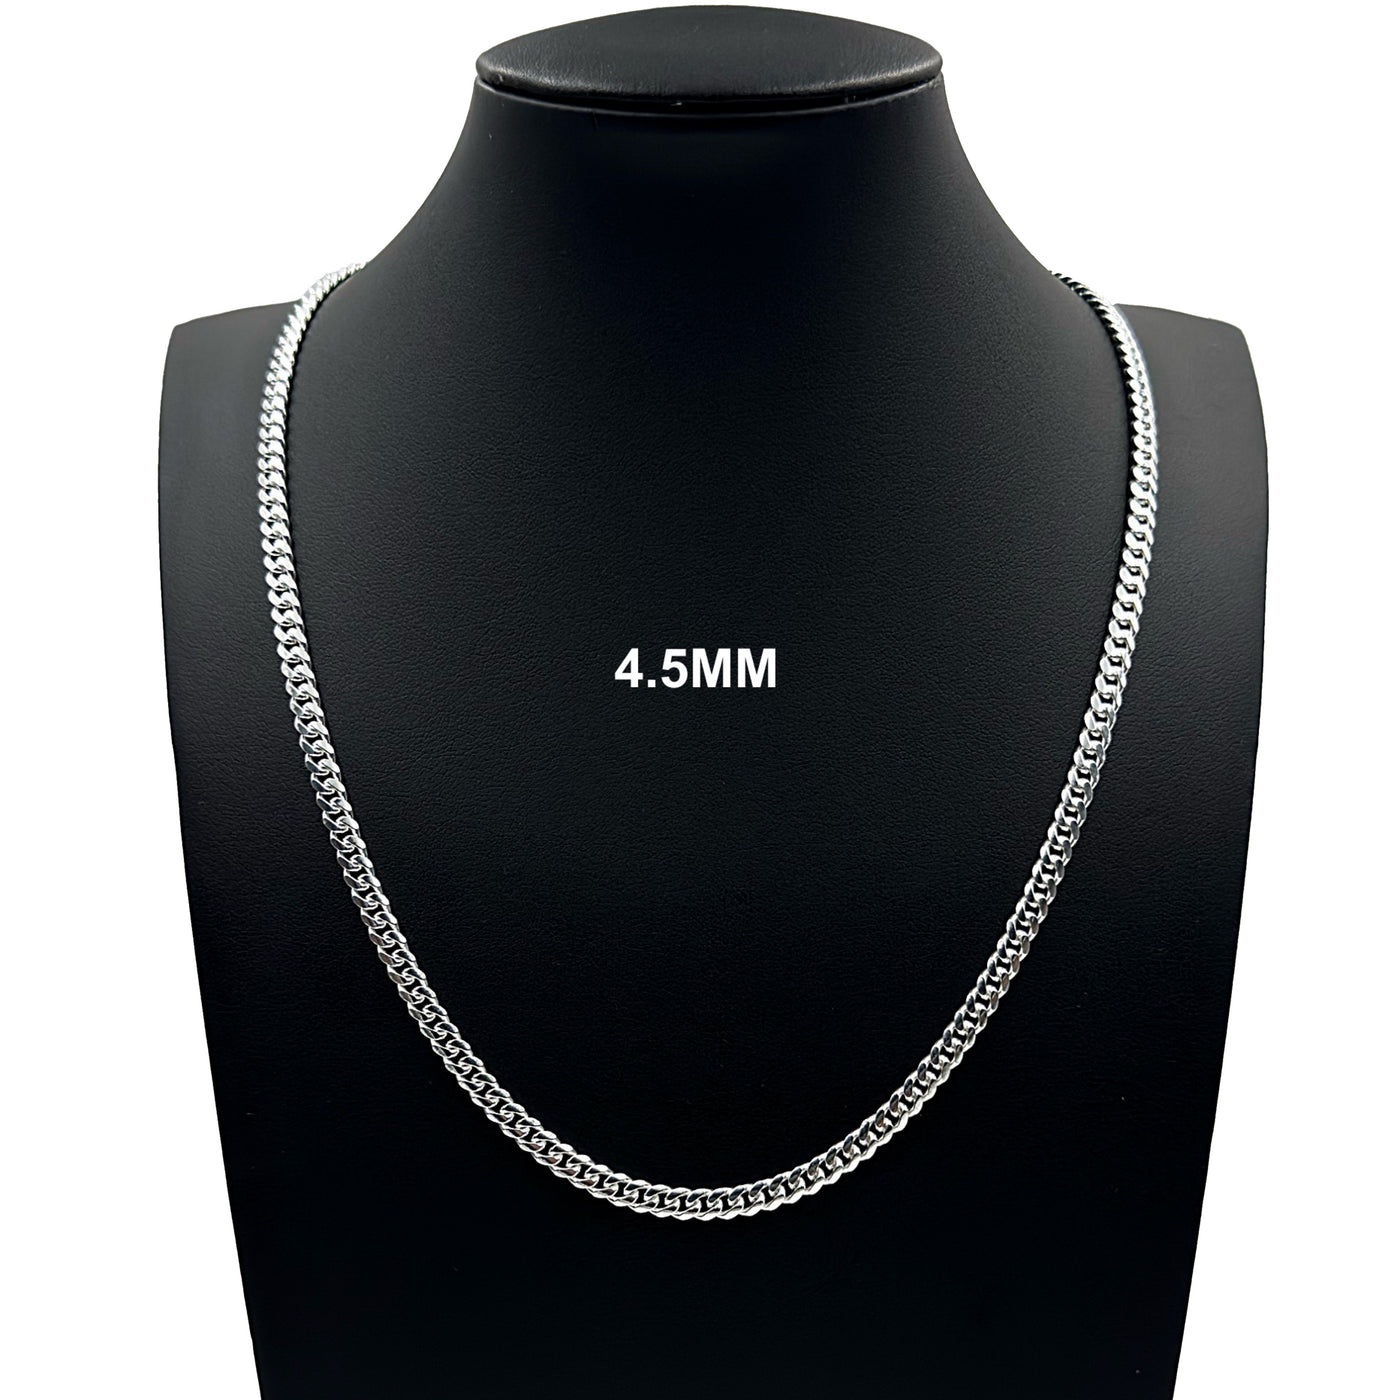 Real 4.5MM Solid 925 Sterling Silver Italian MIAMI CUBAN LINK CHAIN Necklace UNISEX